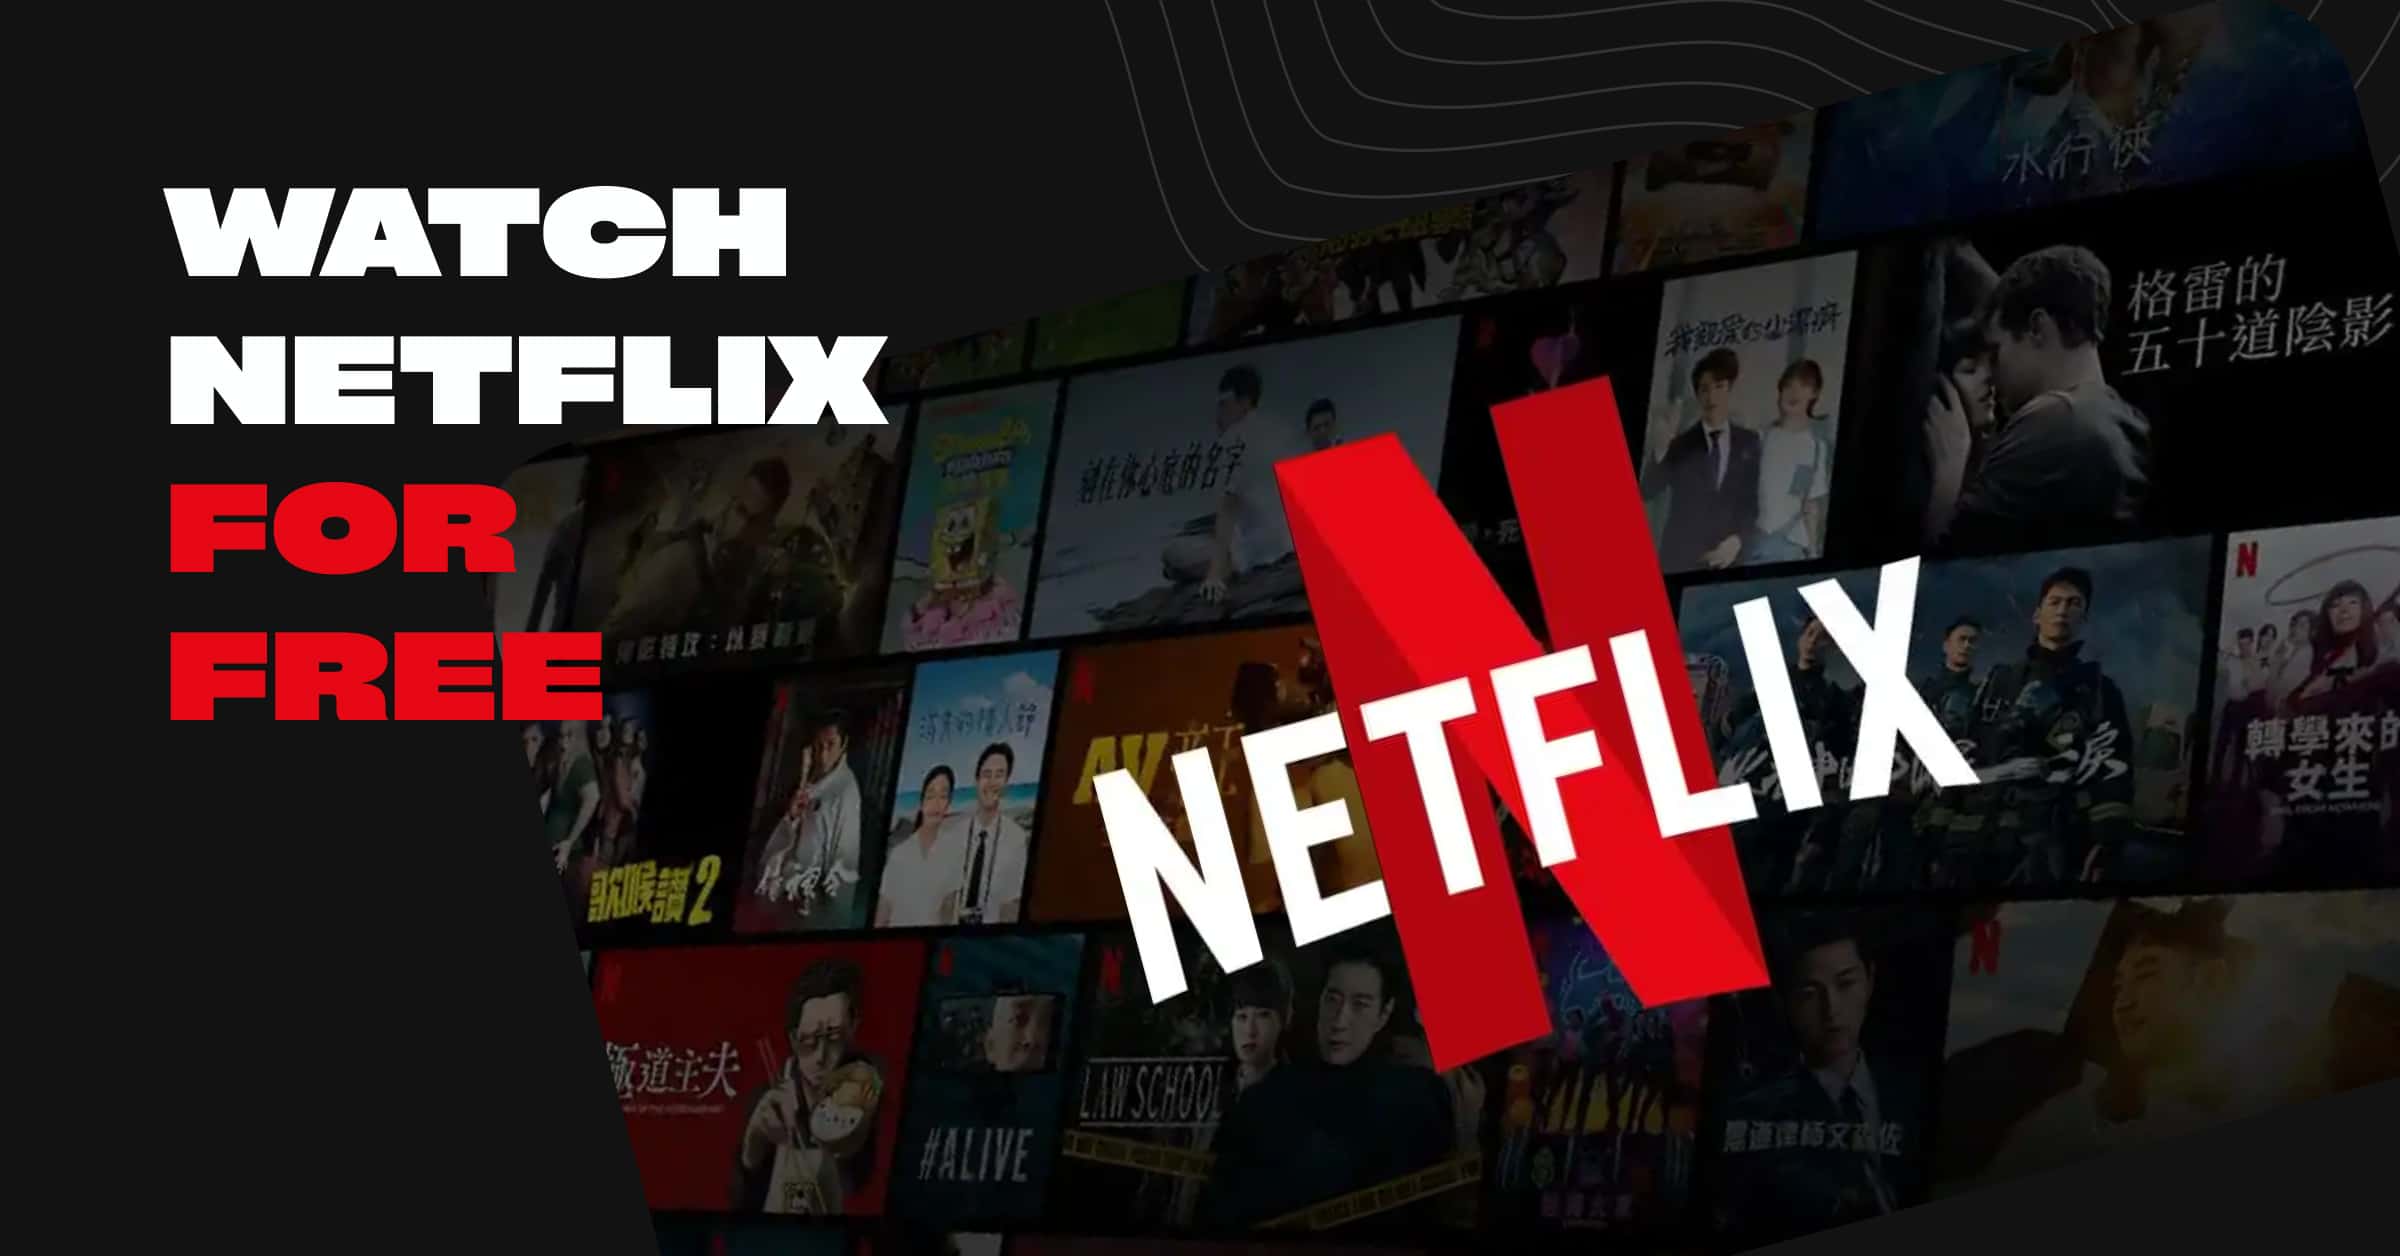 Netflix Gift Card Compare prices